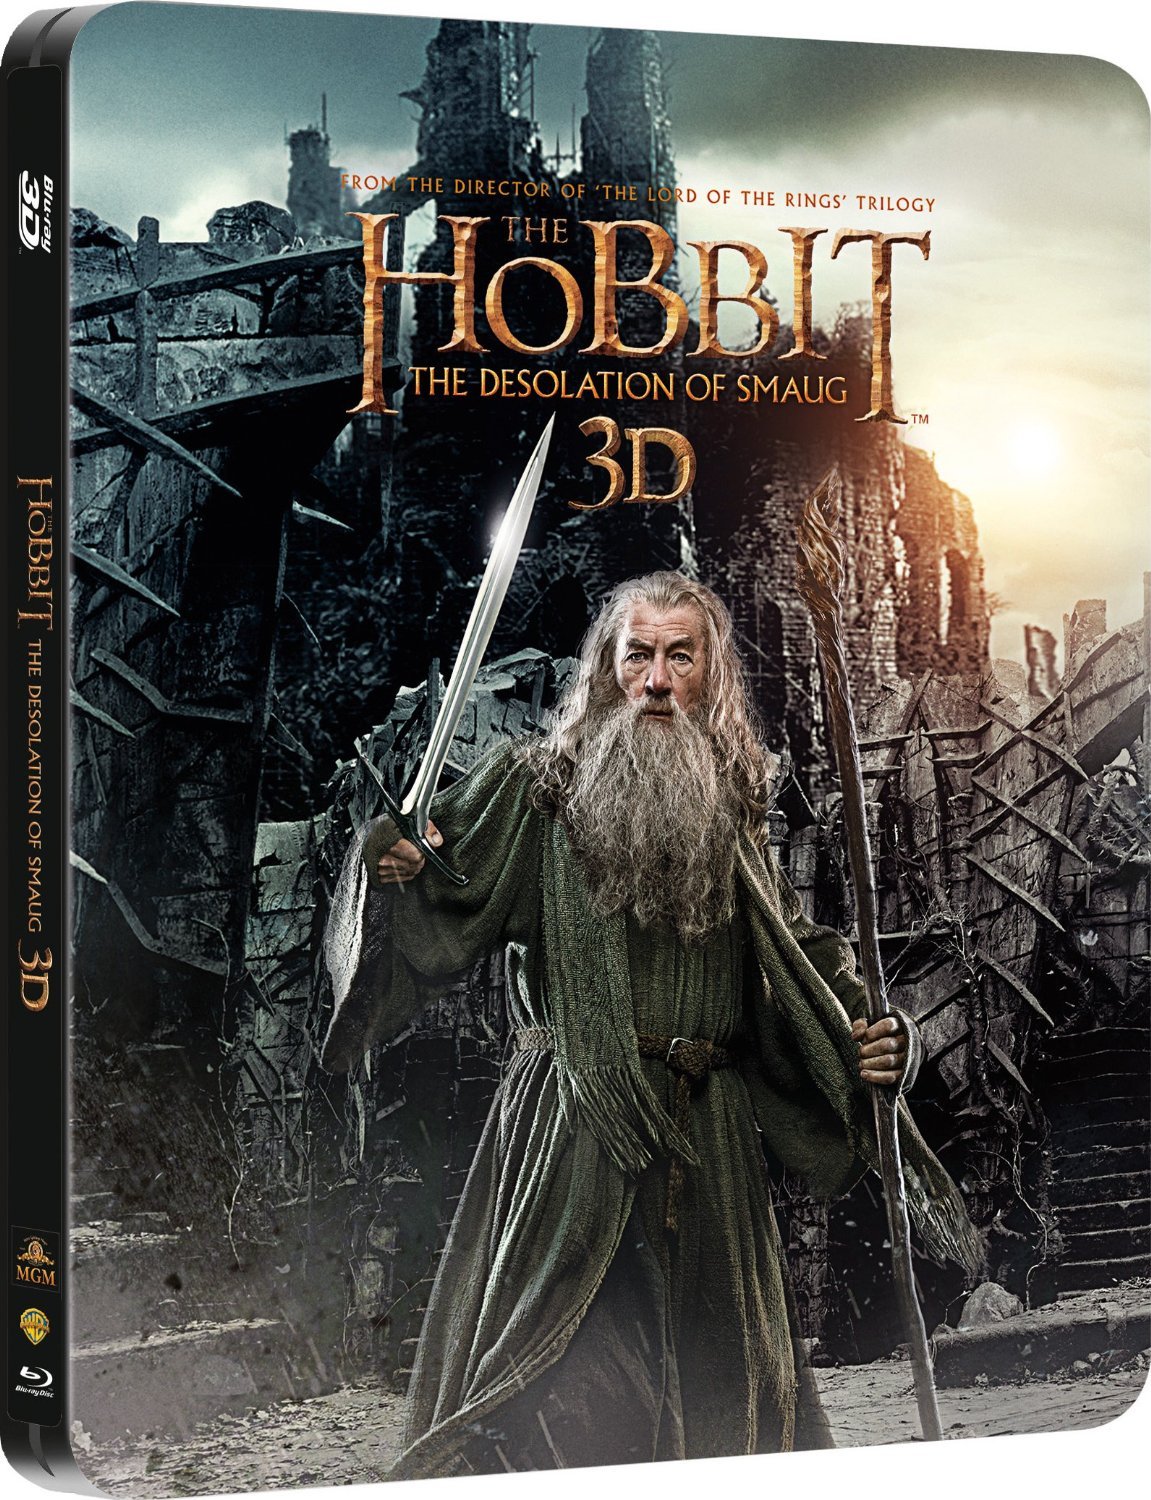 the-hobbit-the-desolation-of-smaug-3d-steel-book-movie-purchase-o